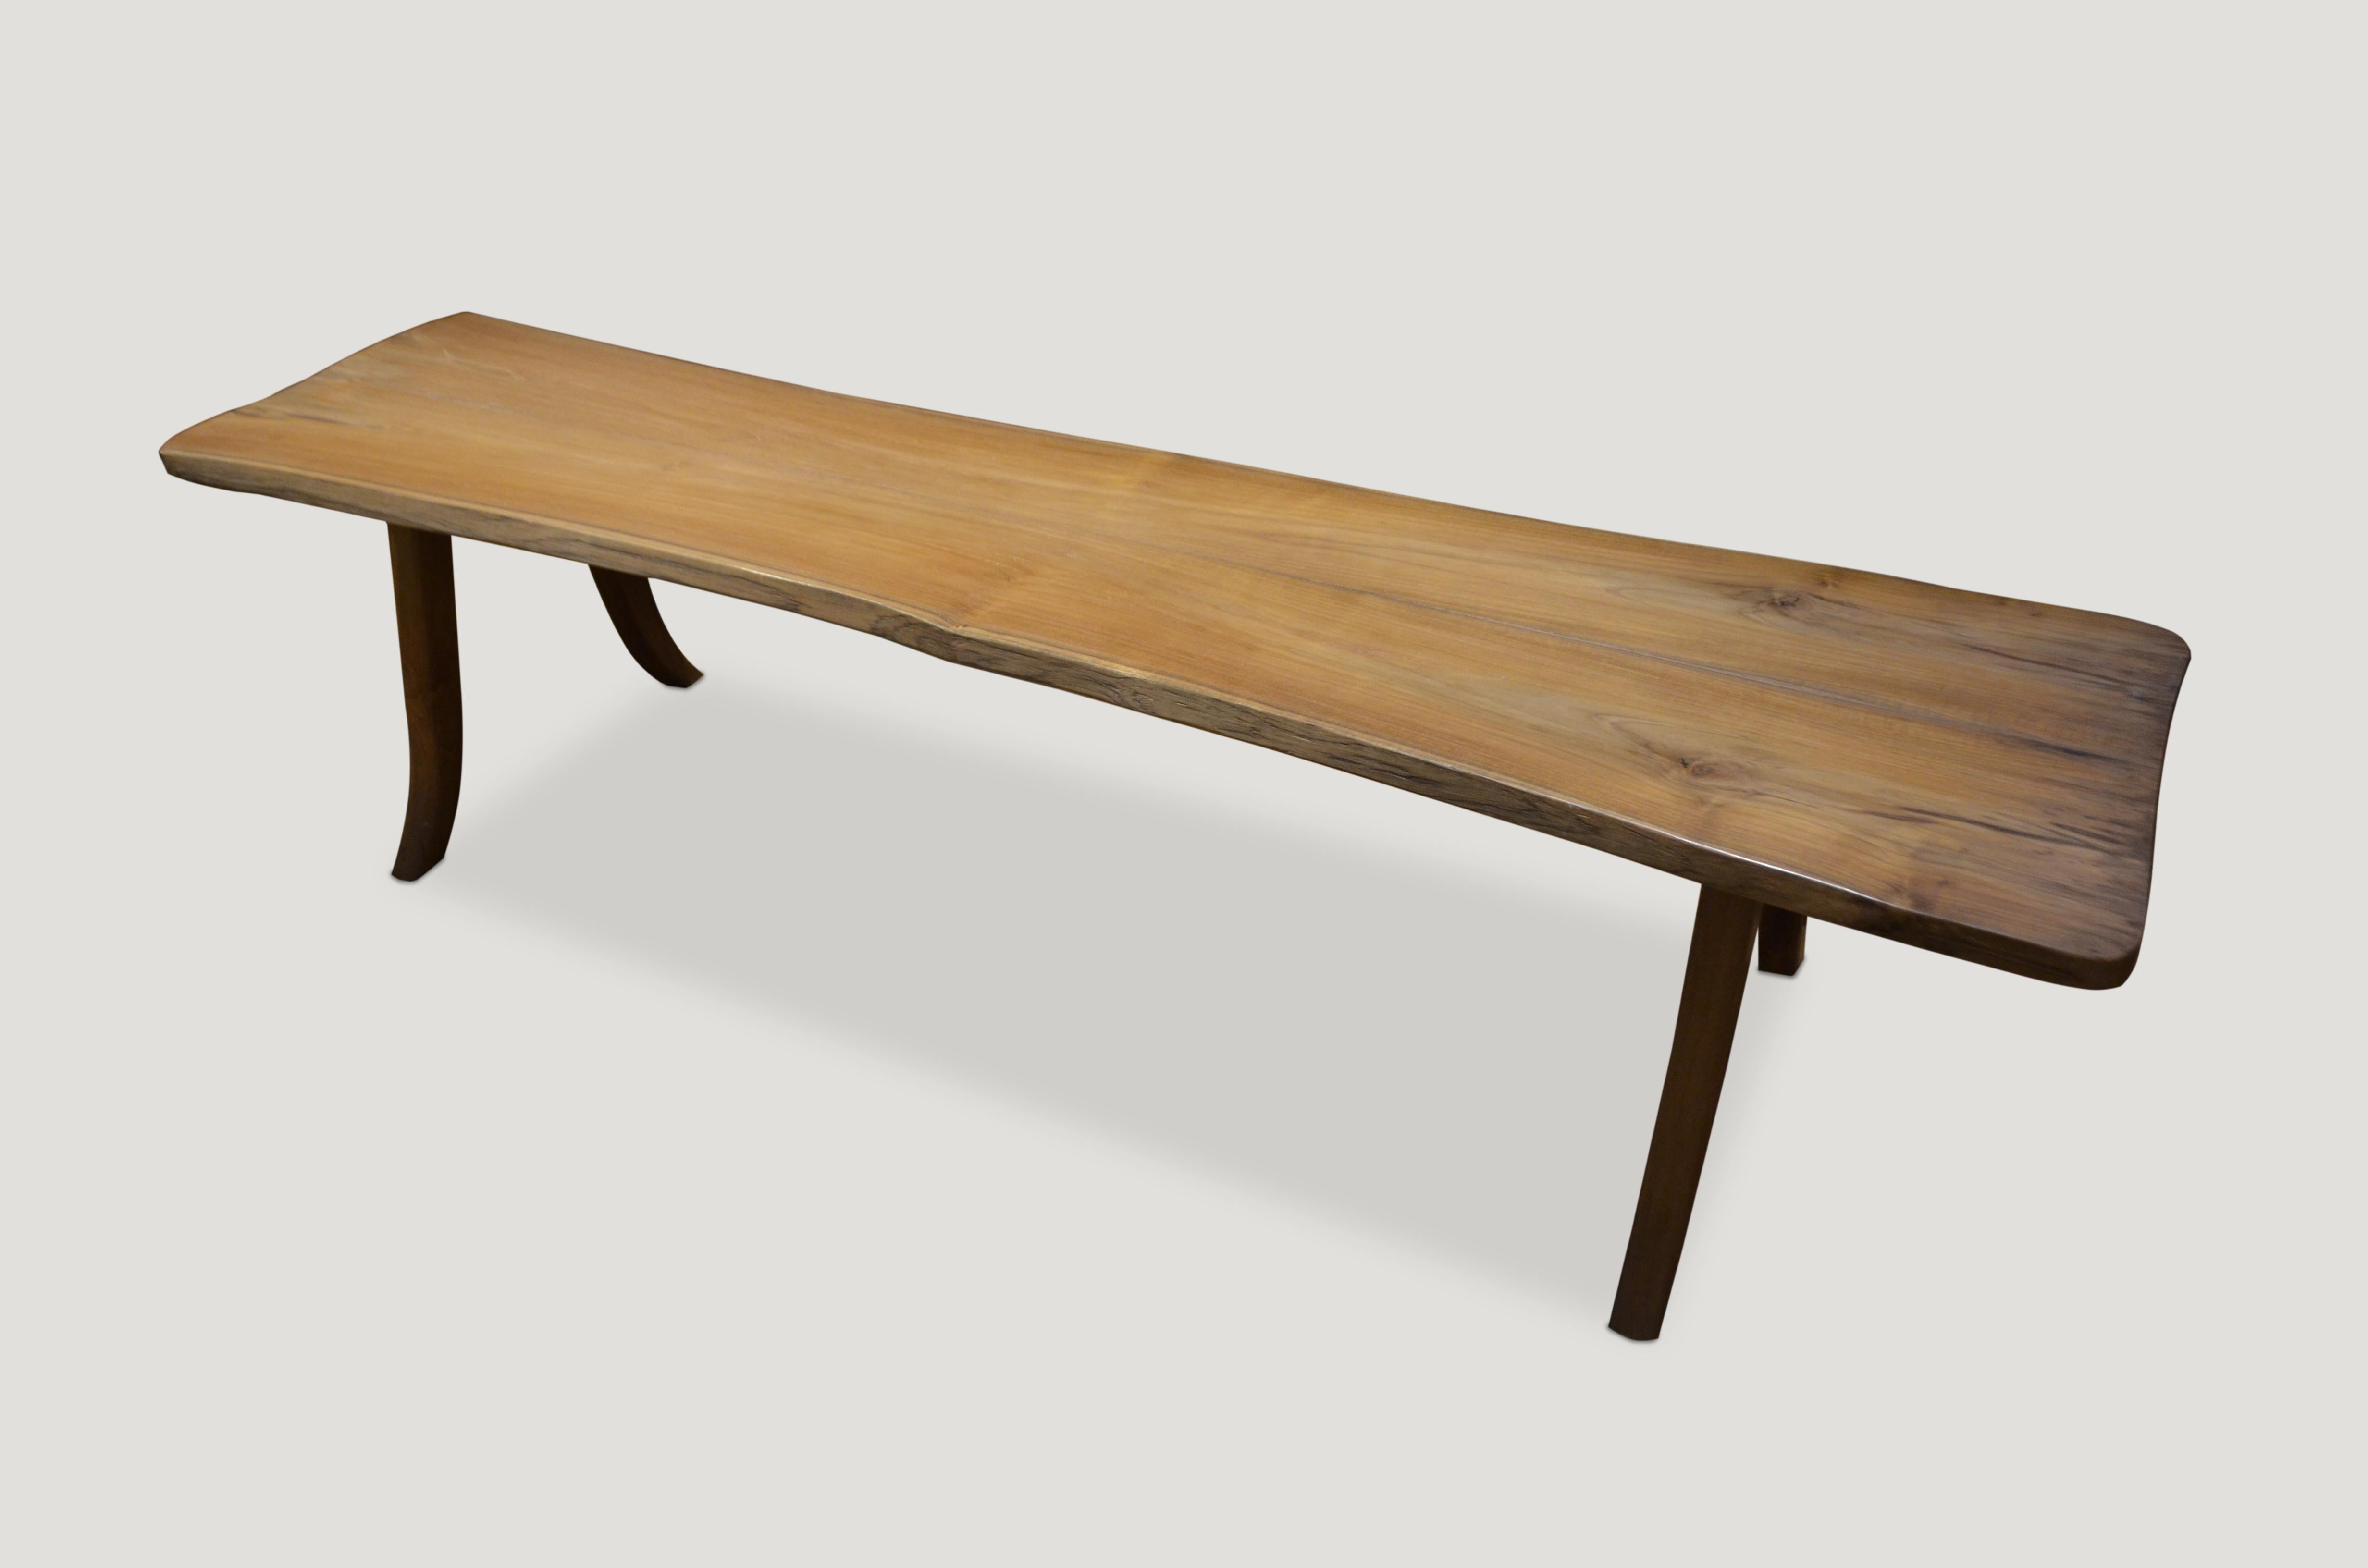 Reclaimed teak bench with a live edge and a natural oil finish. Sliced from the same slab and joined. Perfect for inside or outside living.

Andrianna Shamaris. The Leader In Modern Organic Design™